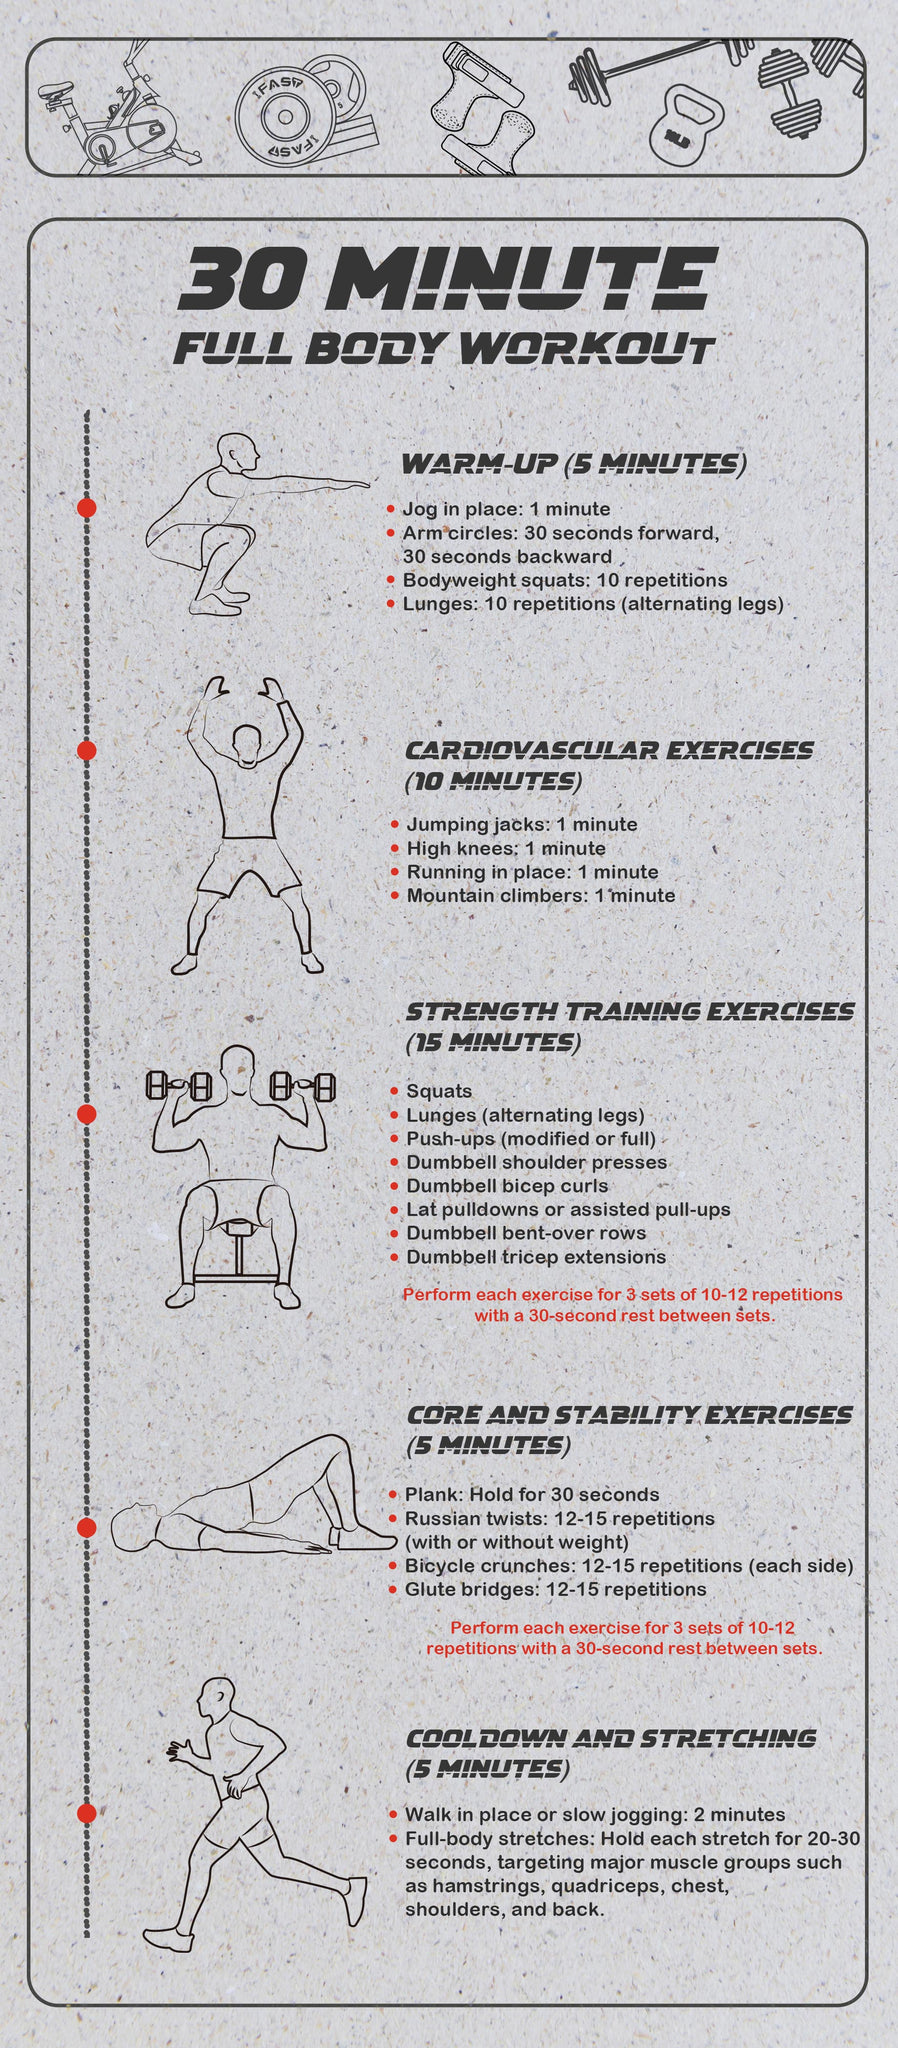 0 Minute Full-Body Workout infographic